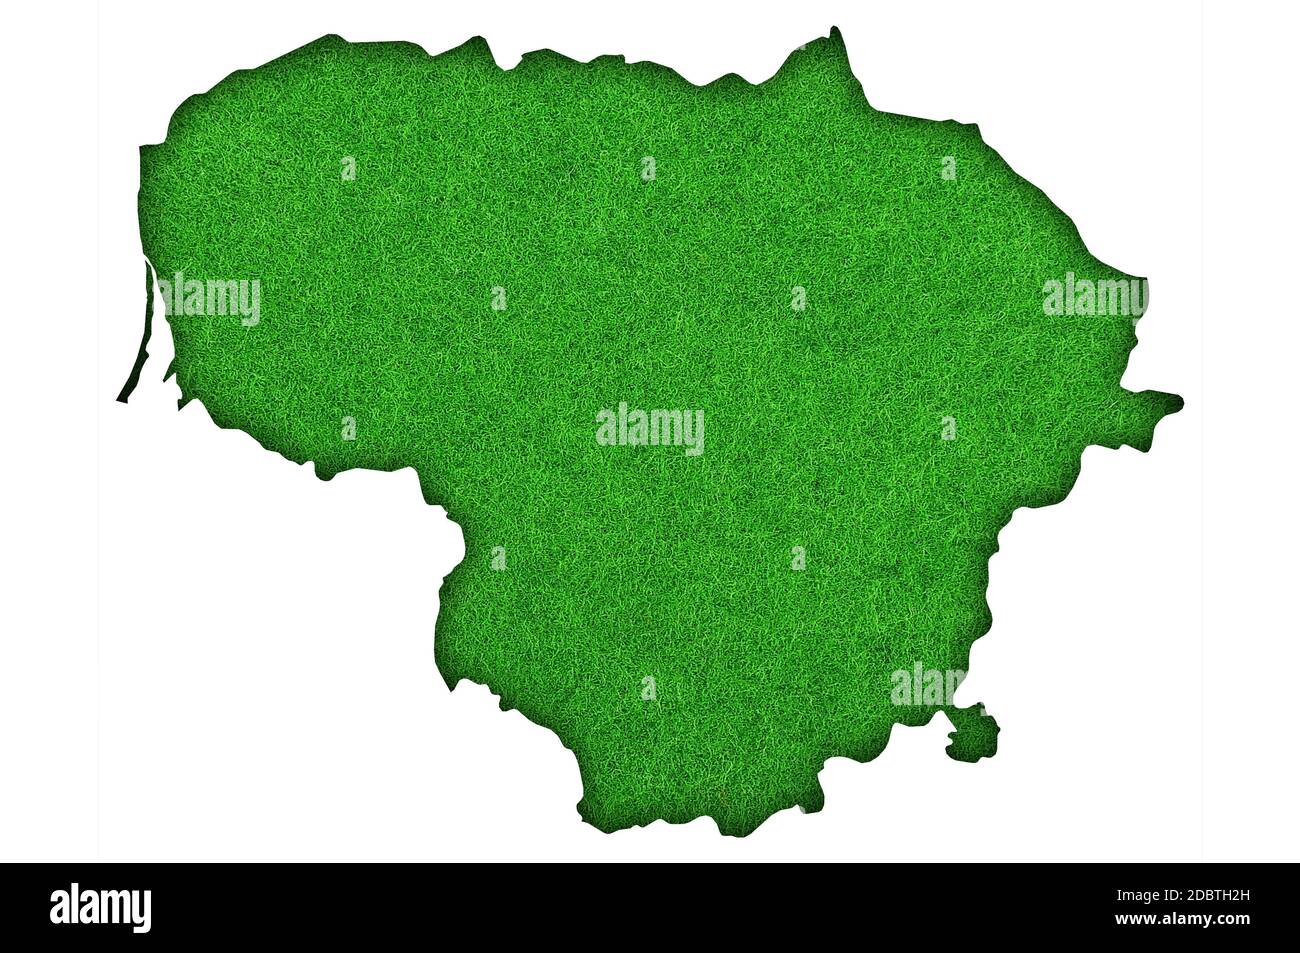 Map of Lithuania on green felt Stock Photo